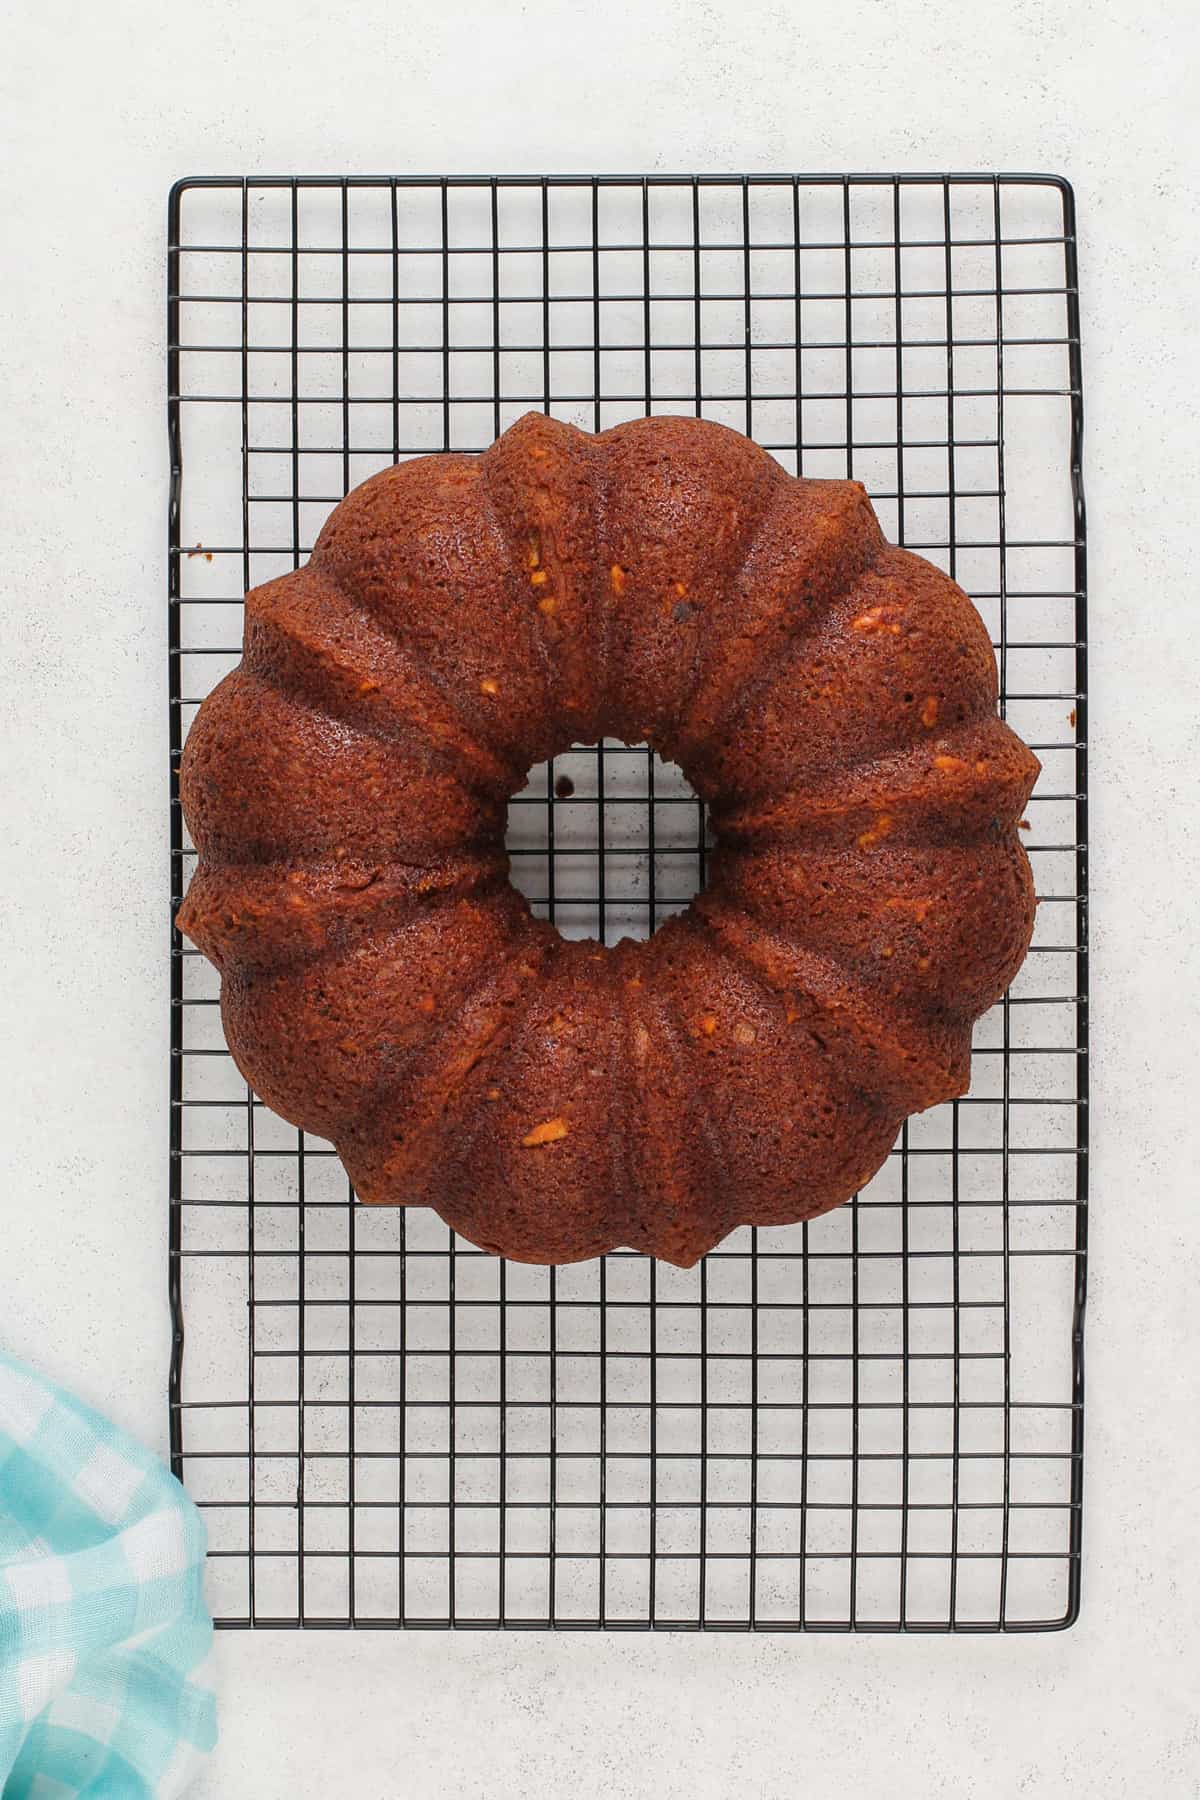 Carrot bundt cake cooling on a wire rack.